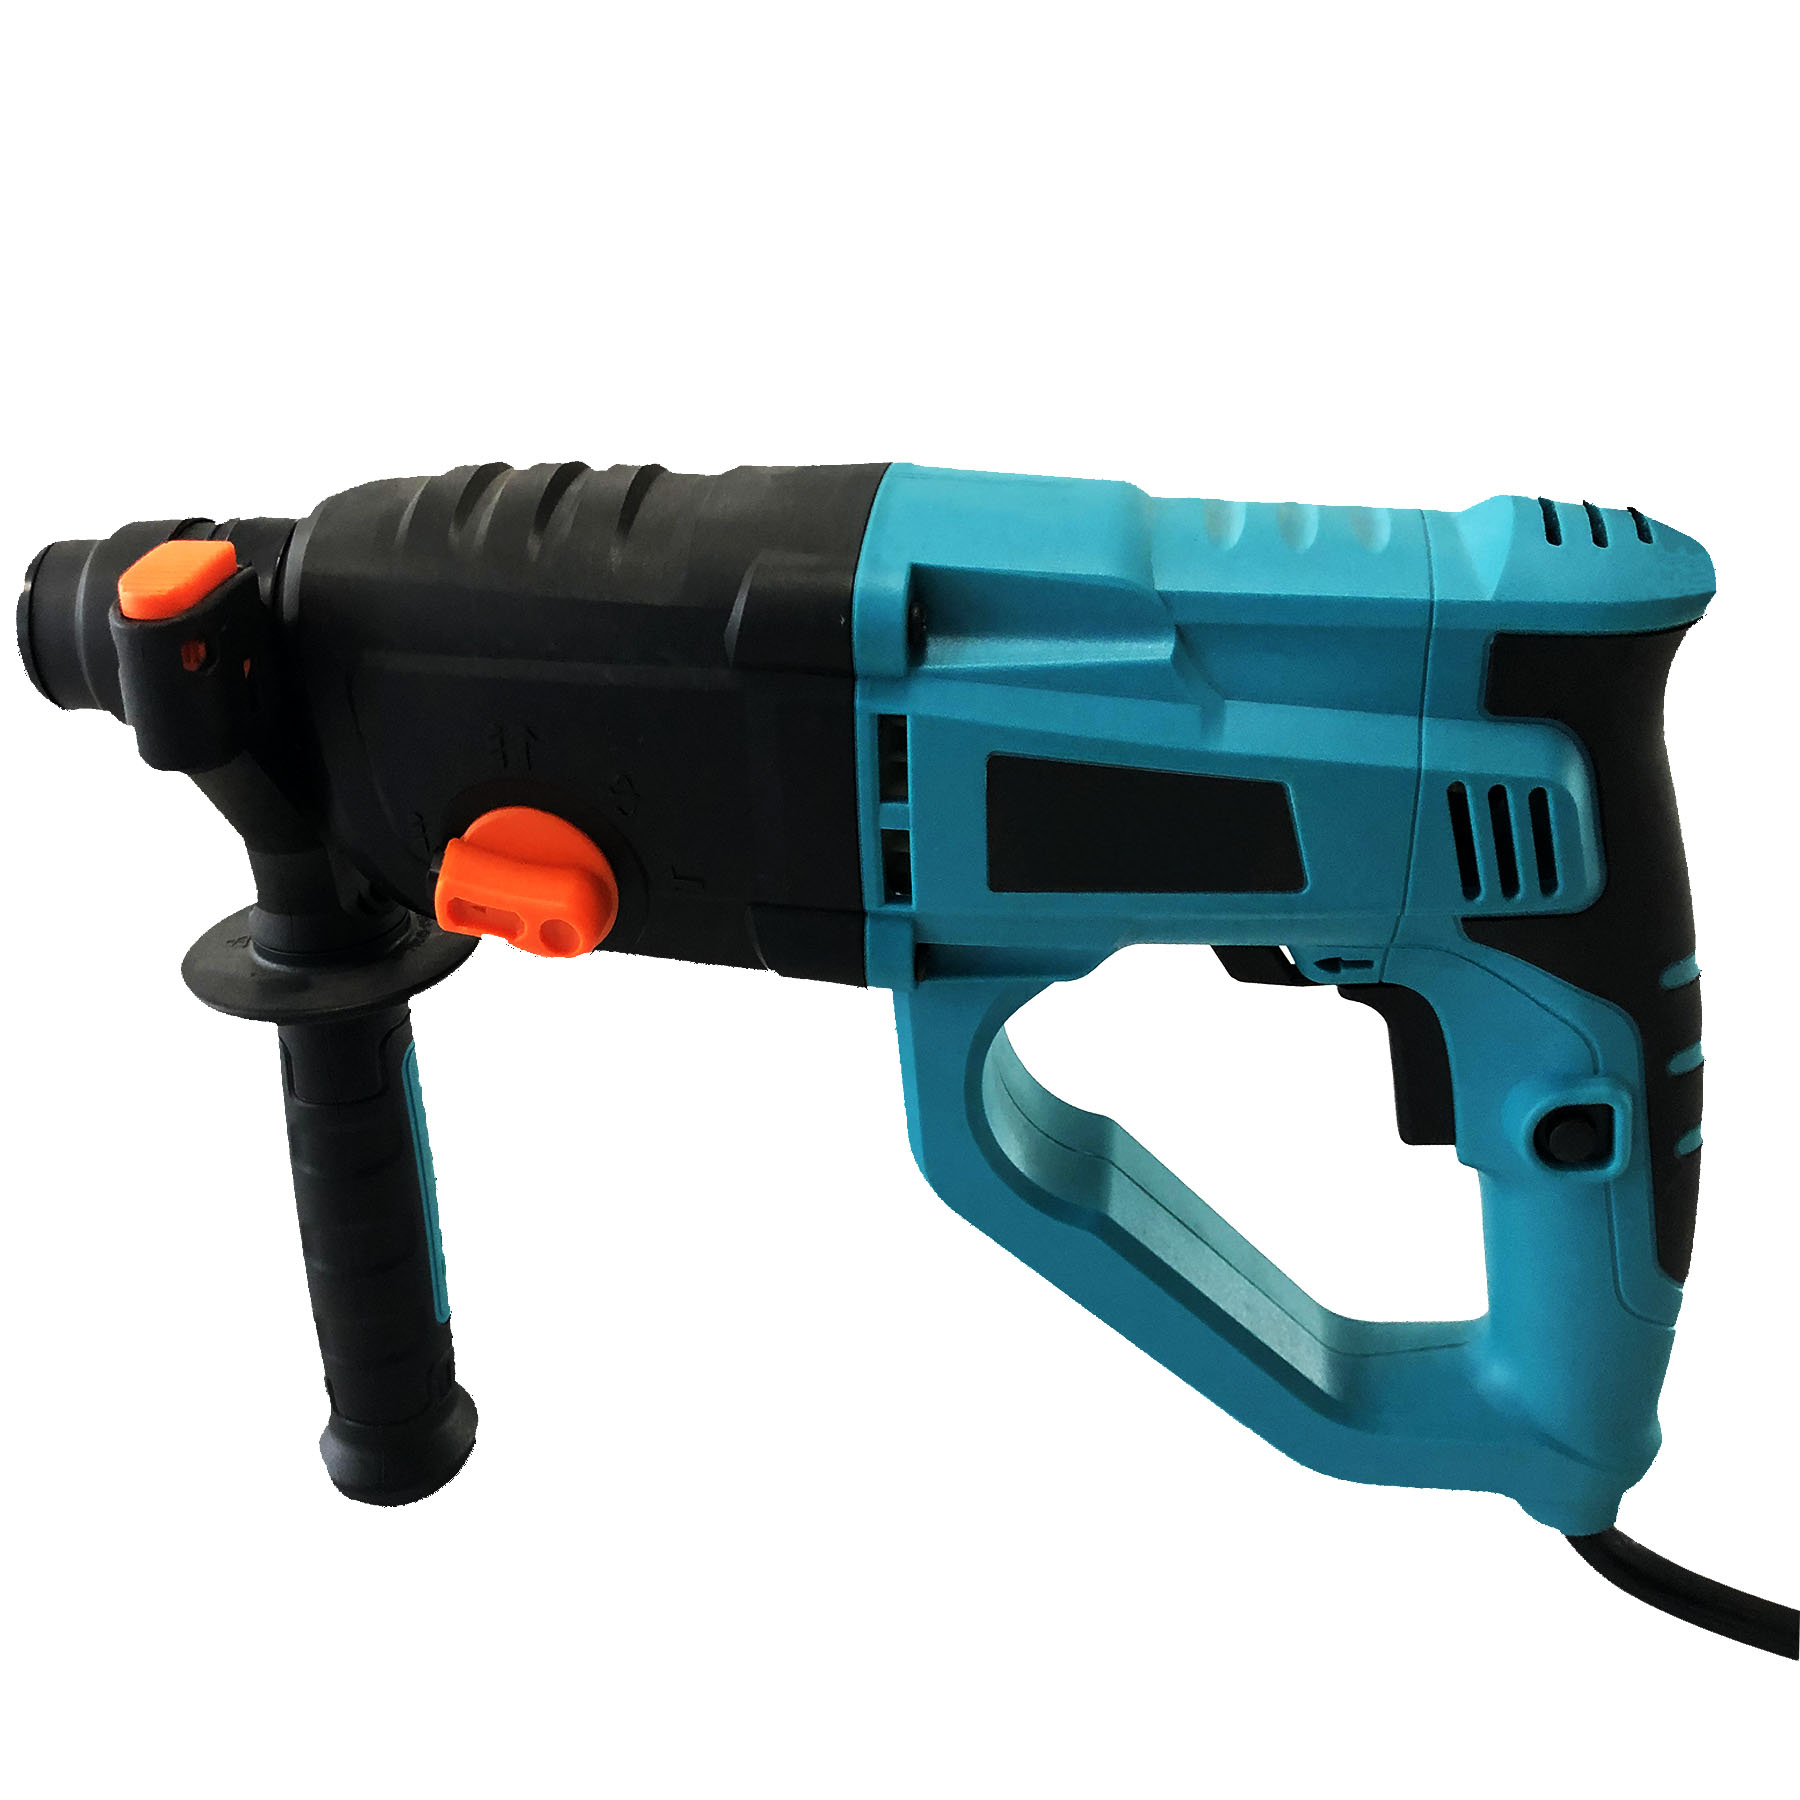 Ansitool 1050w power electric rotary hammer